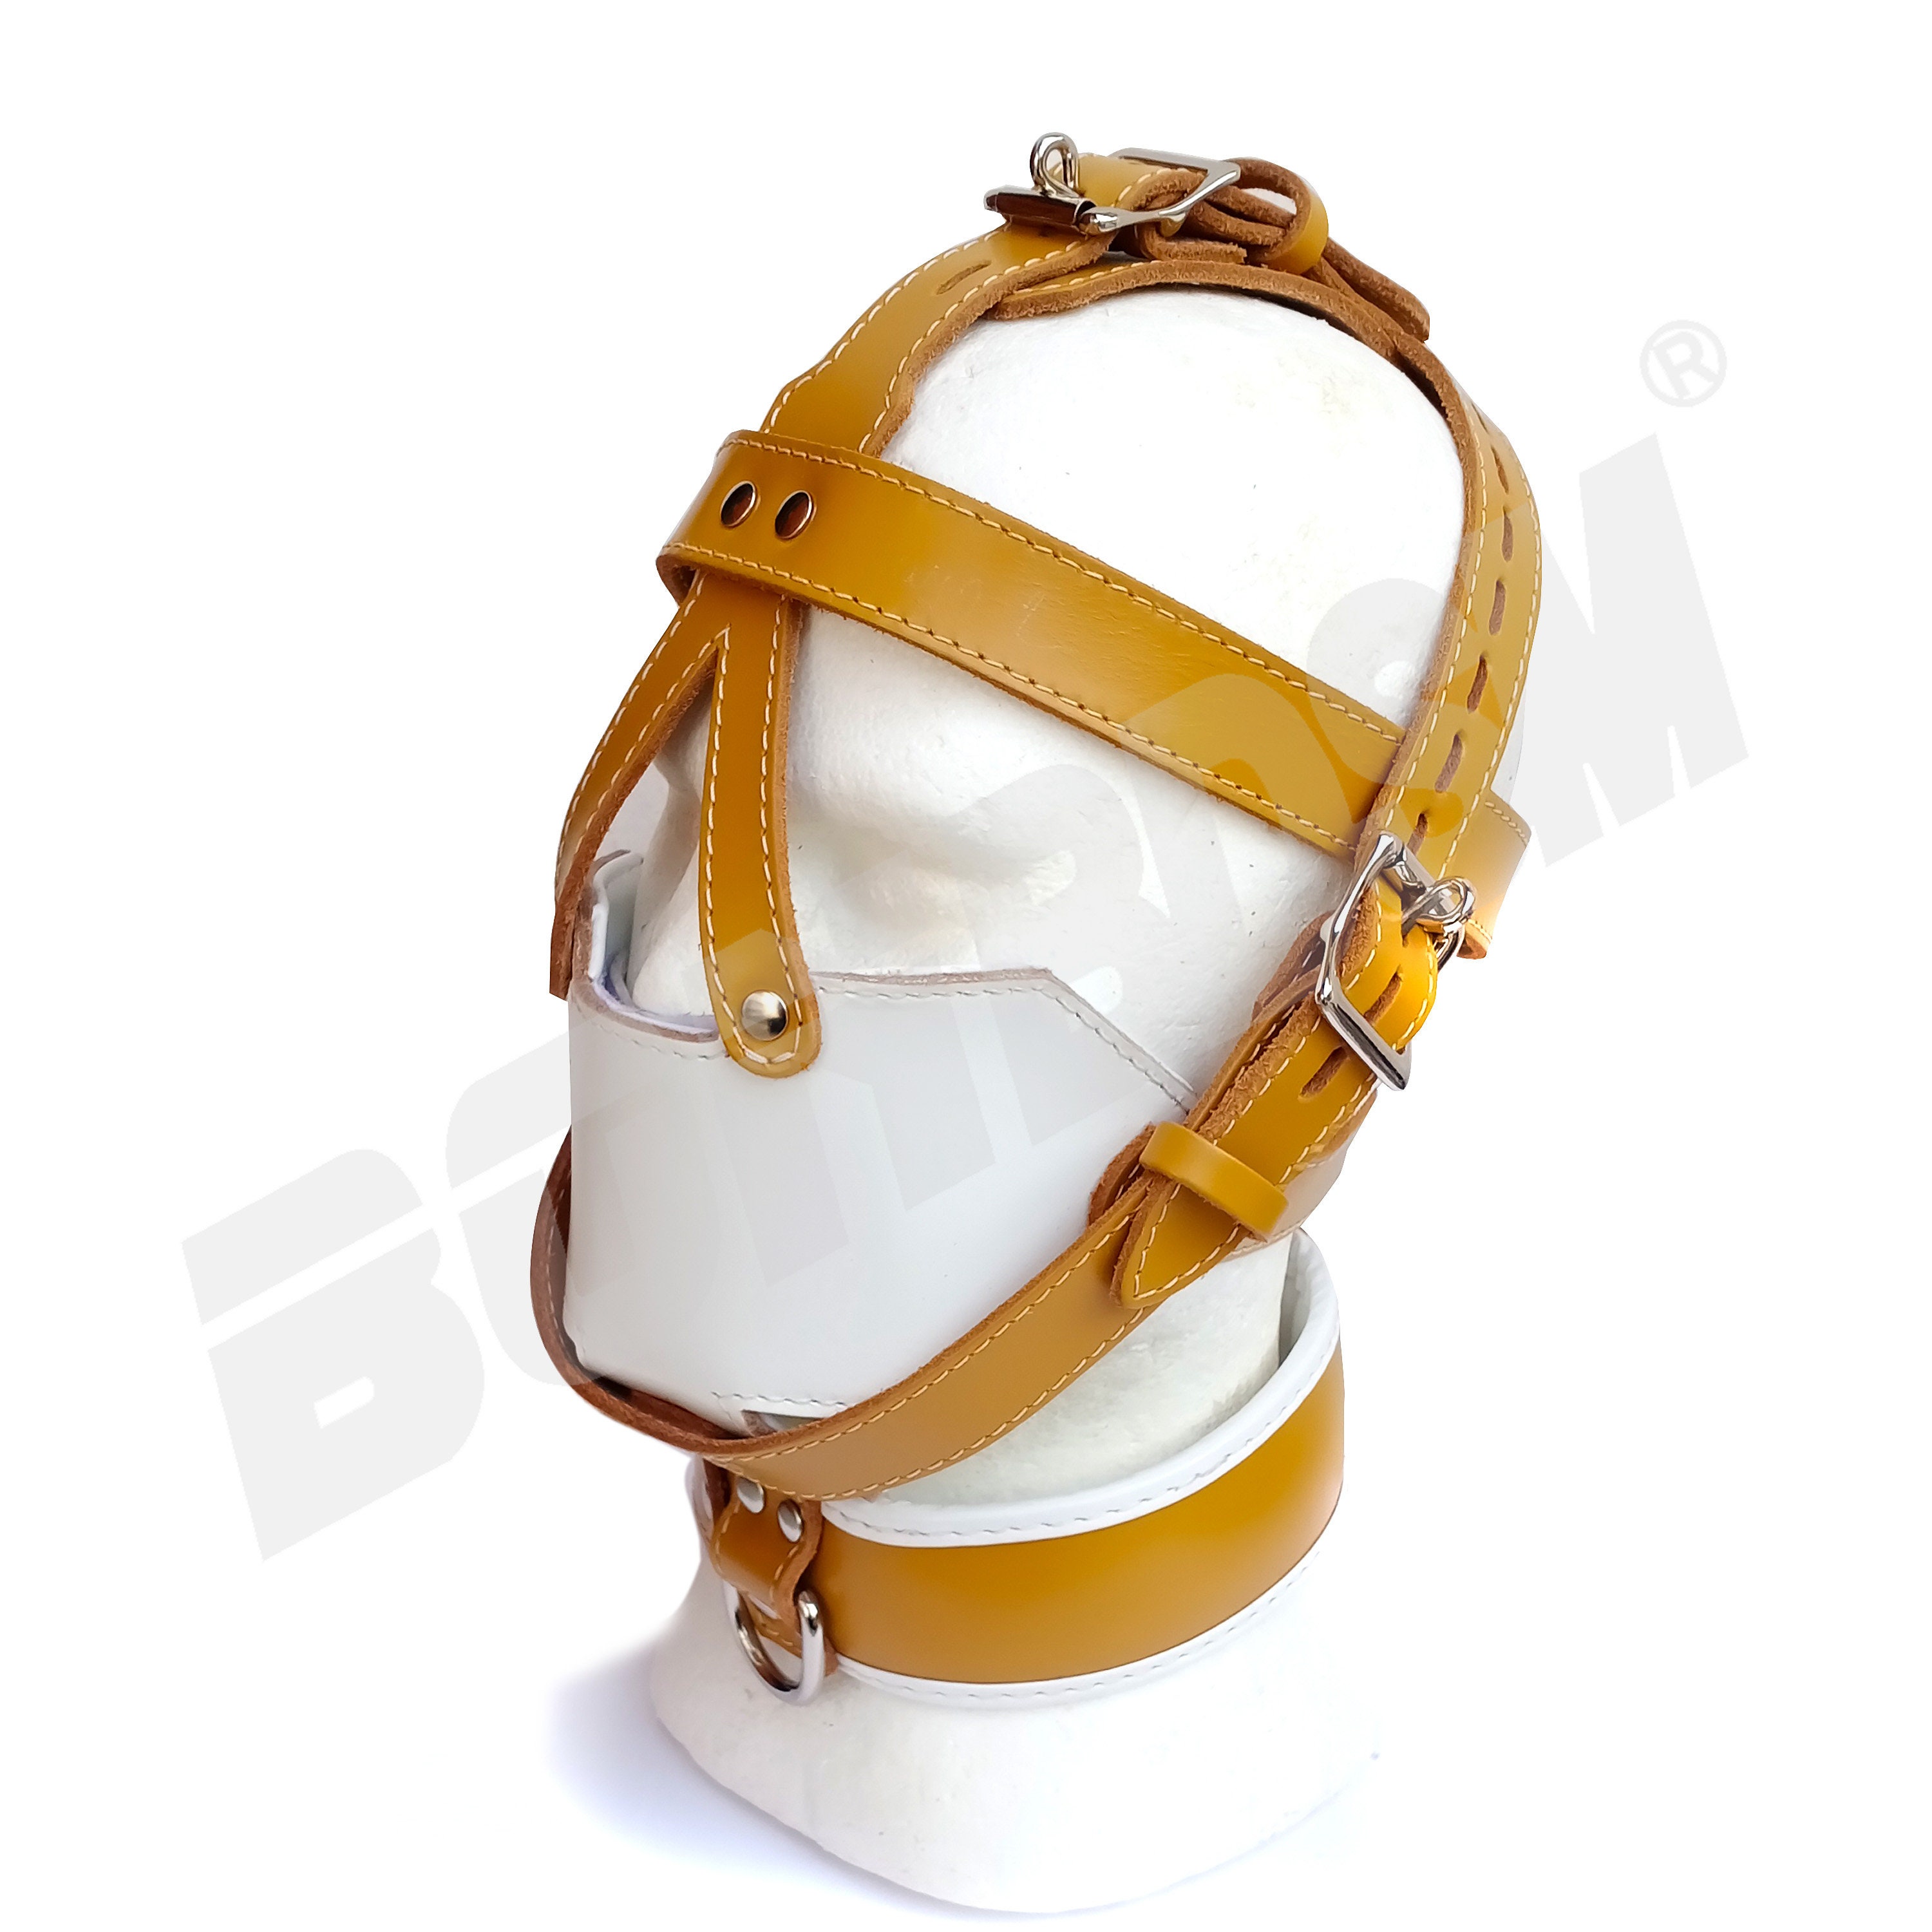 Slave Muzzle With A Removable Gag Medical Leather Padded Head Etsy